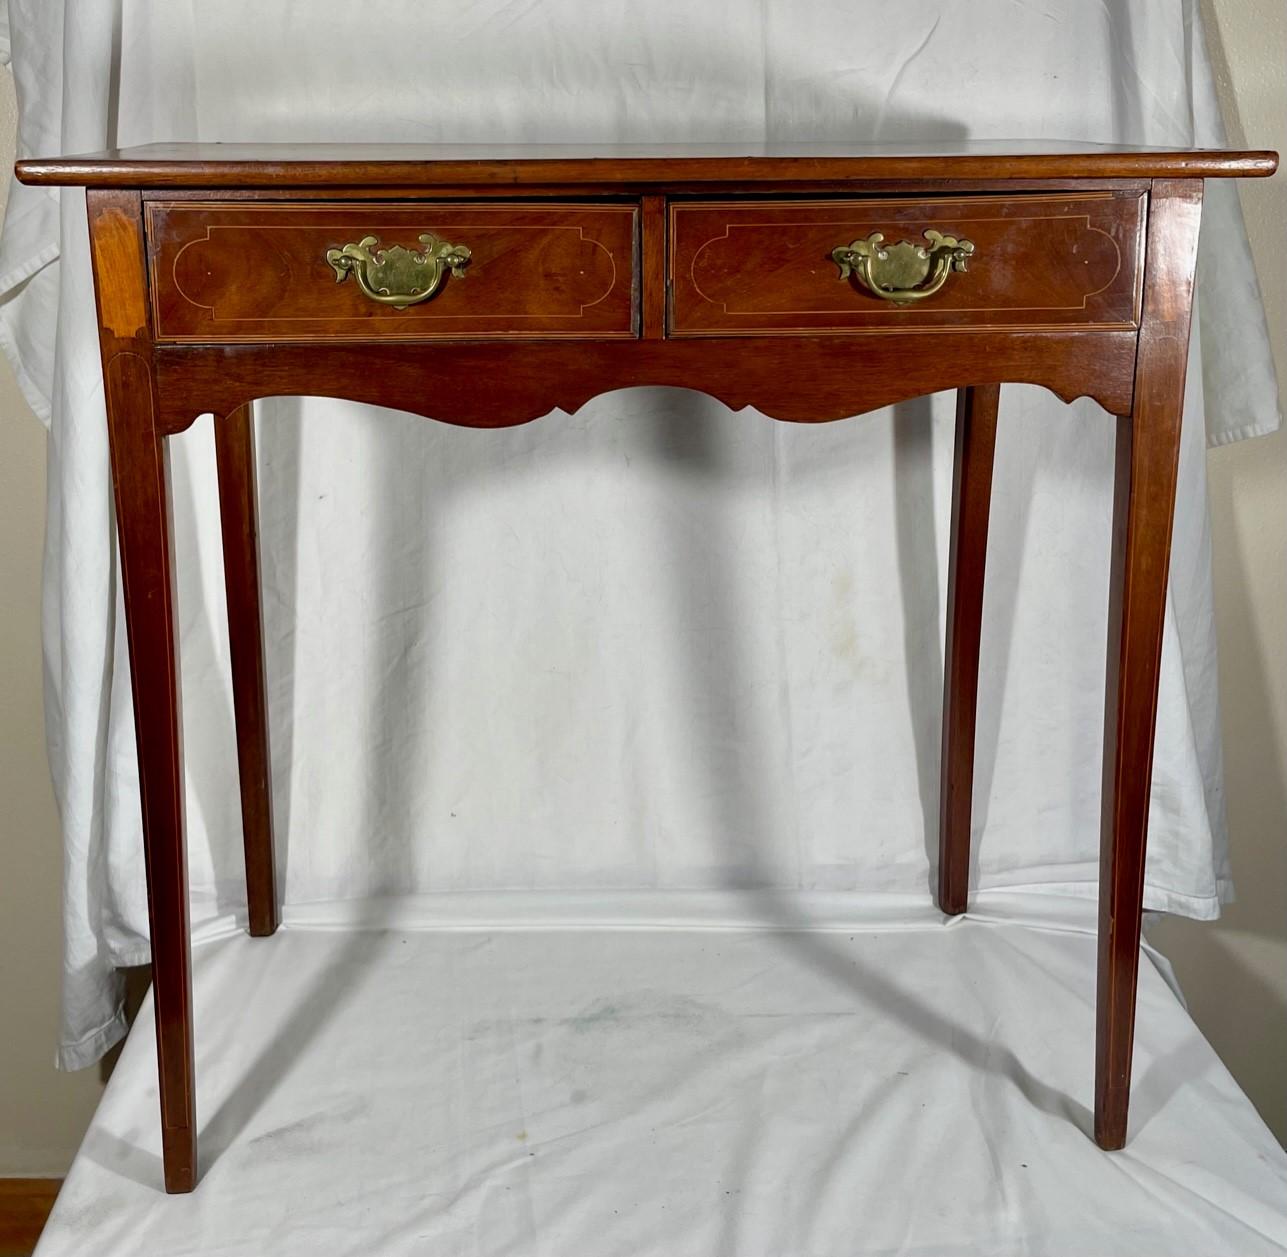 Rare English Georgian side table, circa 1760.

Fabulous 18th century side table, an example of Hepplewhite period elegance. This rare side table is crafted in superb quality with crossbanding and stringing around the edge of the top and down the